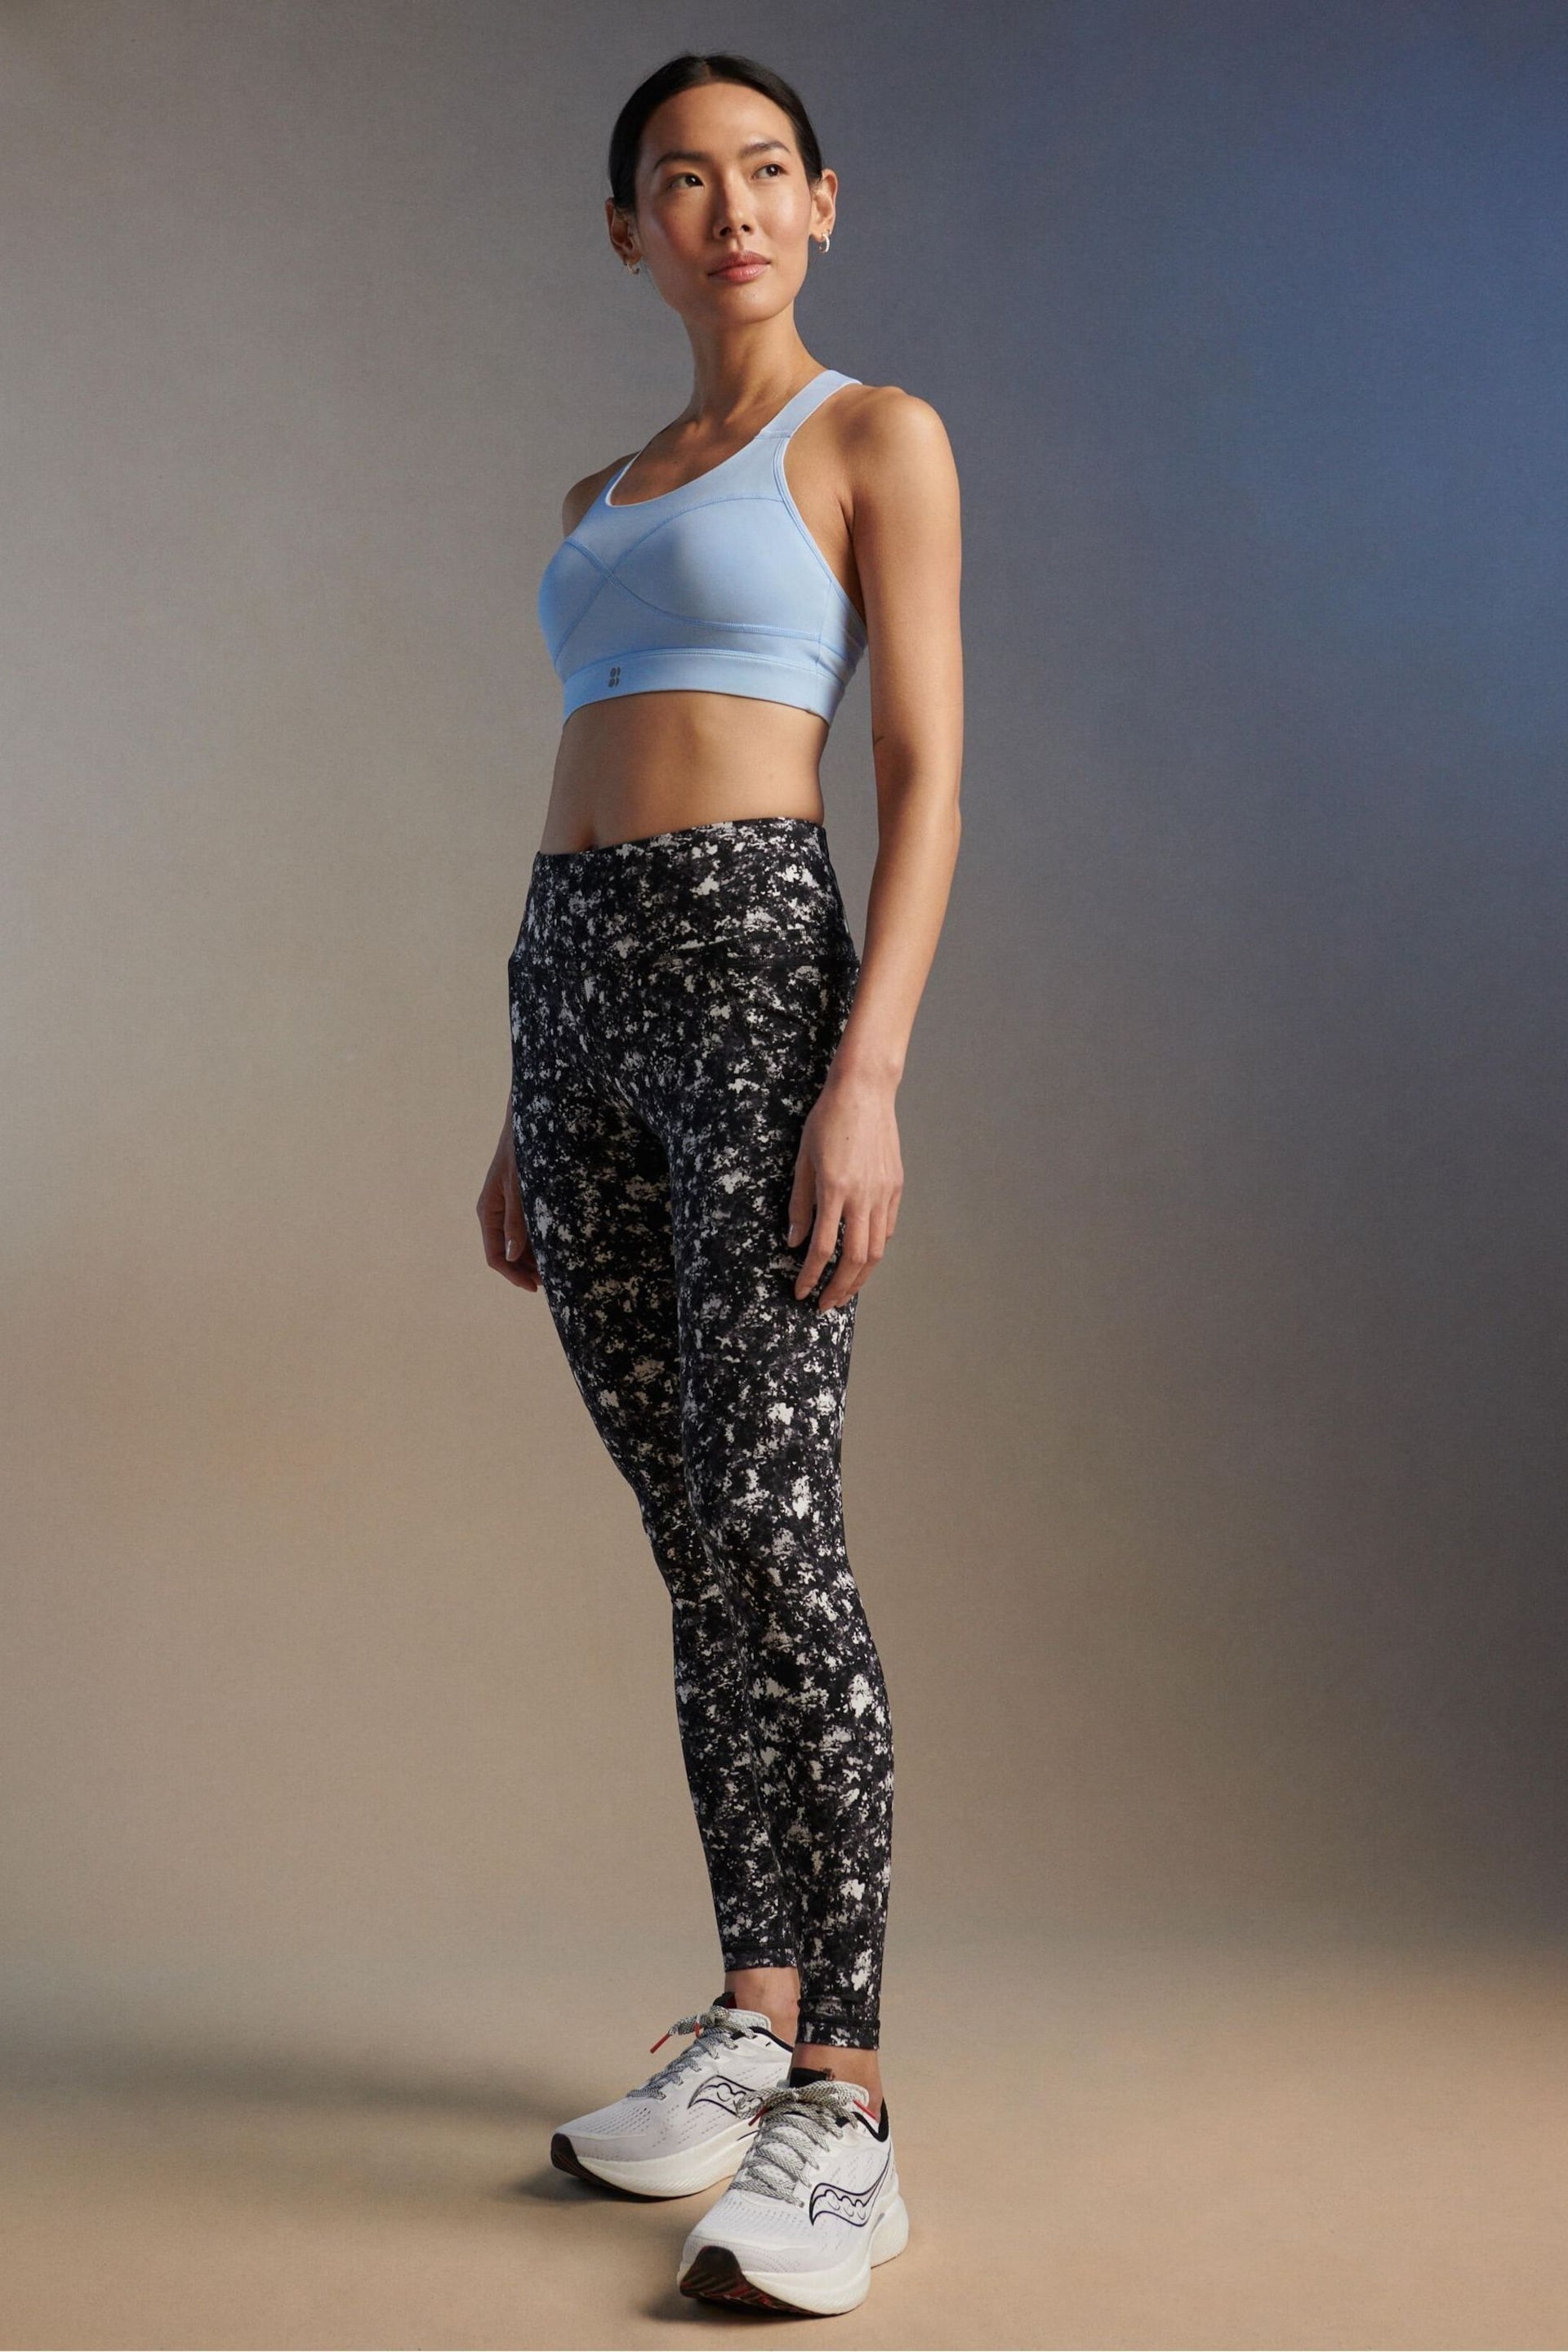 Sweaty Betty Black Electric Texture Print Full Length Power Workout Leggings - Image 1 of 10